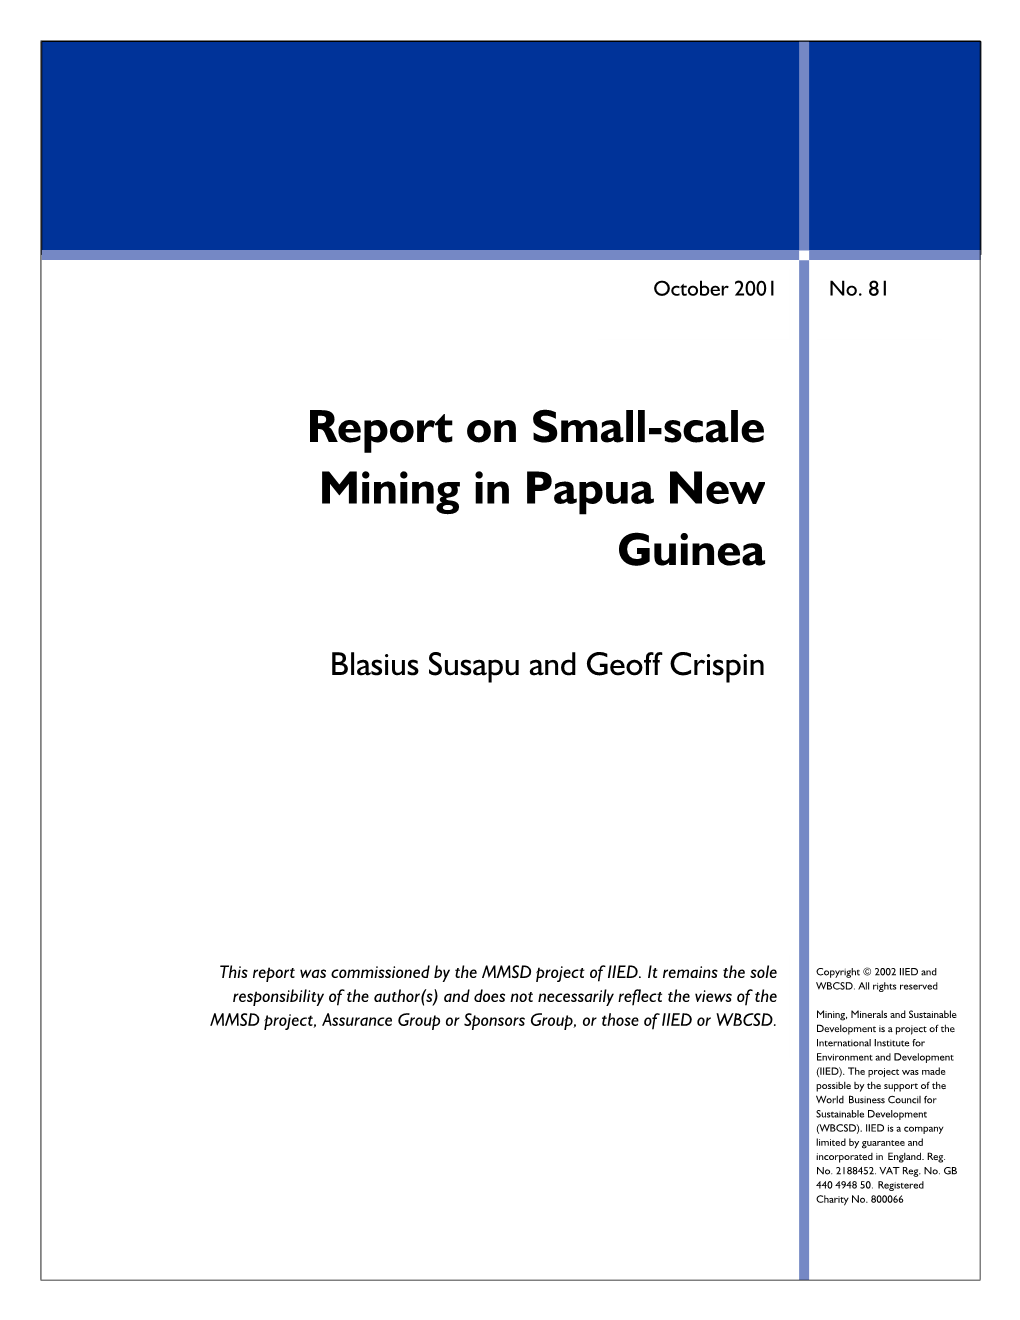 Report on Small-Scale Mining in Papua New Guinea